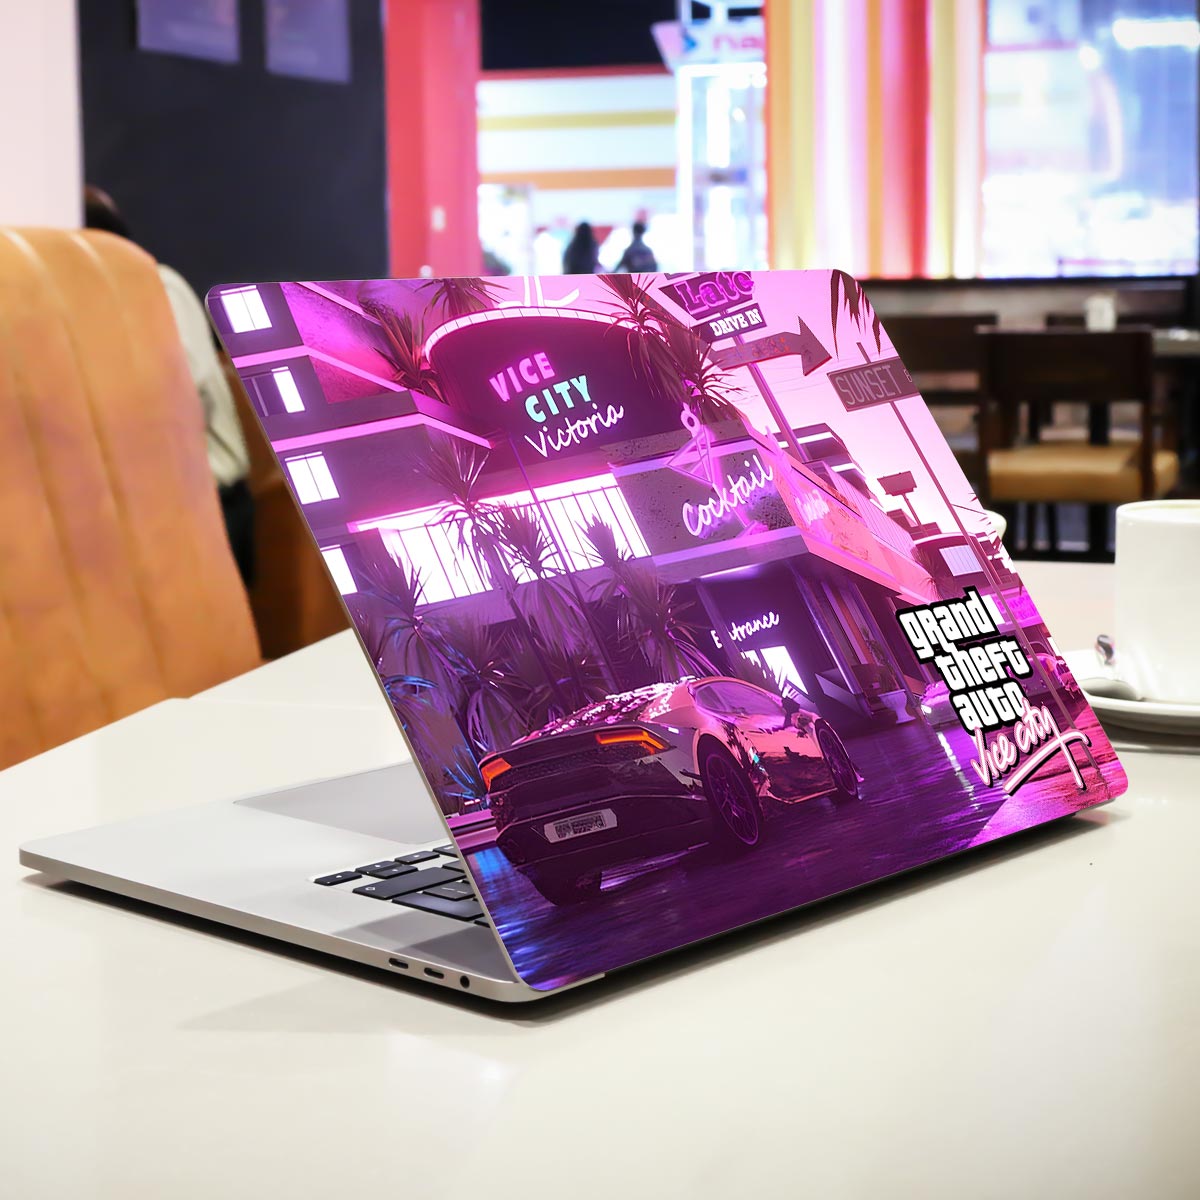 Grand Theft Auto Vice City Gaming Laptop Skin